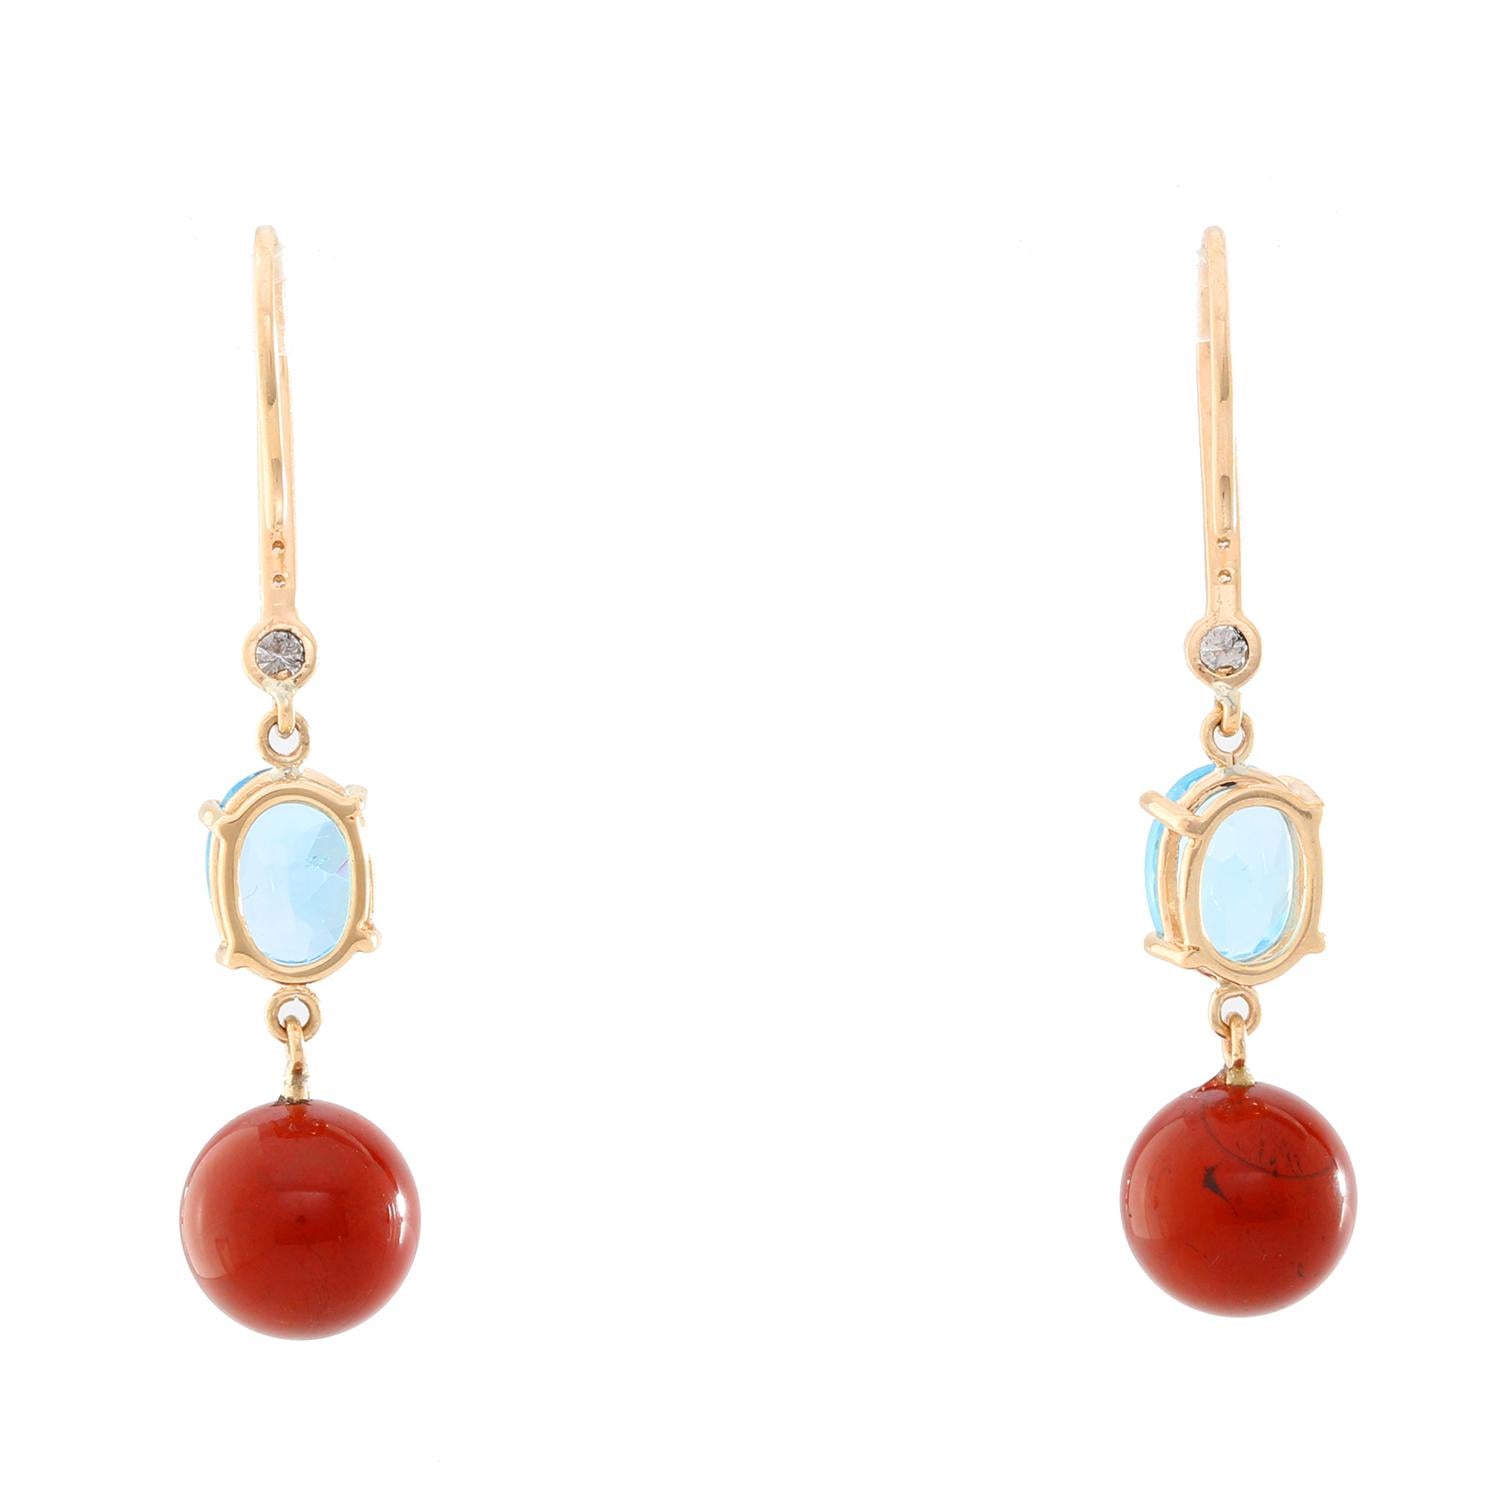 14K Yellow Gold  Blue Topaz and Red Jasper Diamond Dangle Earrings - Oval cut Blue Topaz with a Red Jasper ball. Set in 14K yellow gold with 6 diamond. Total weight 5.3. Total drop 1.5 inch. Great to dress up or down.